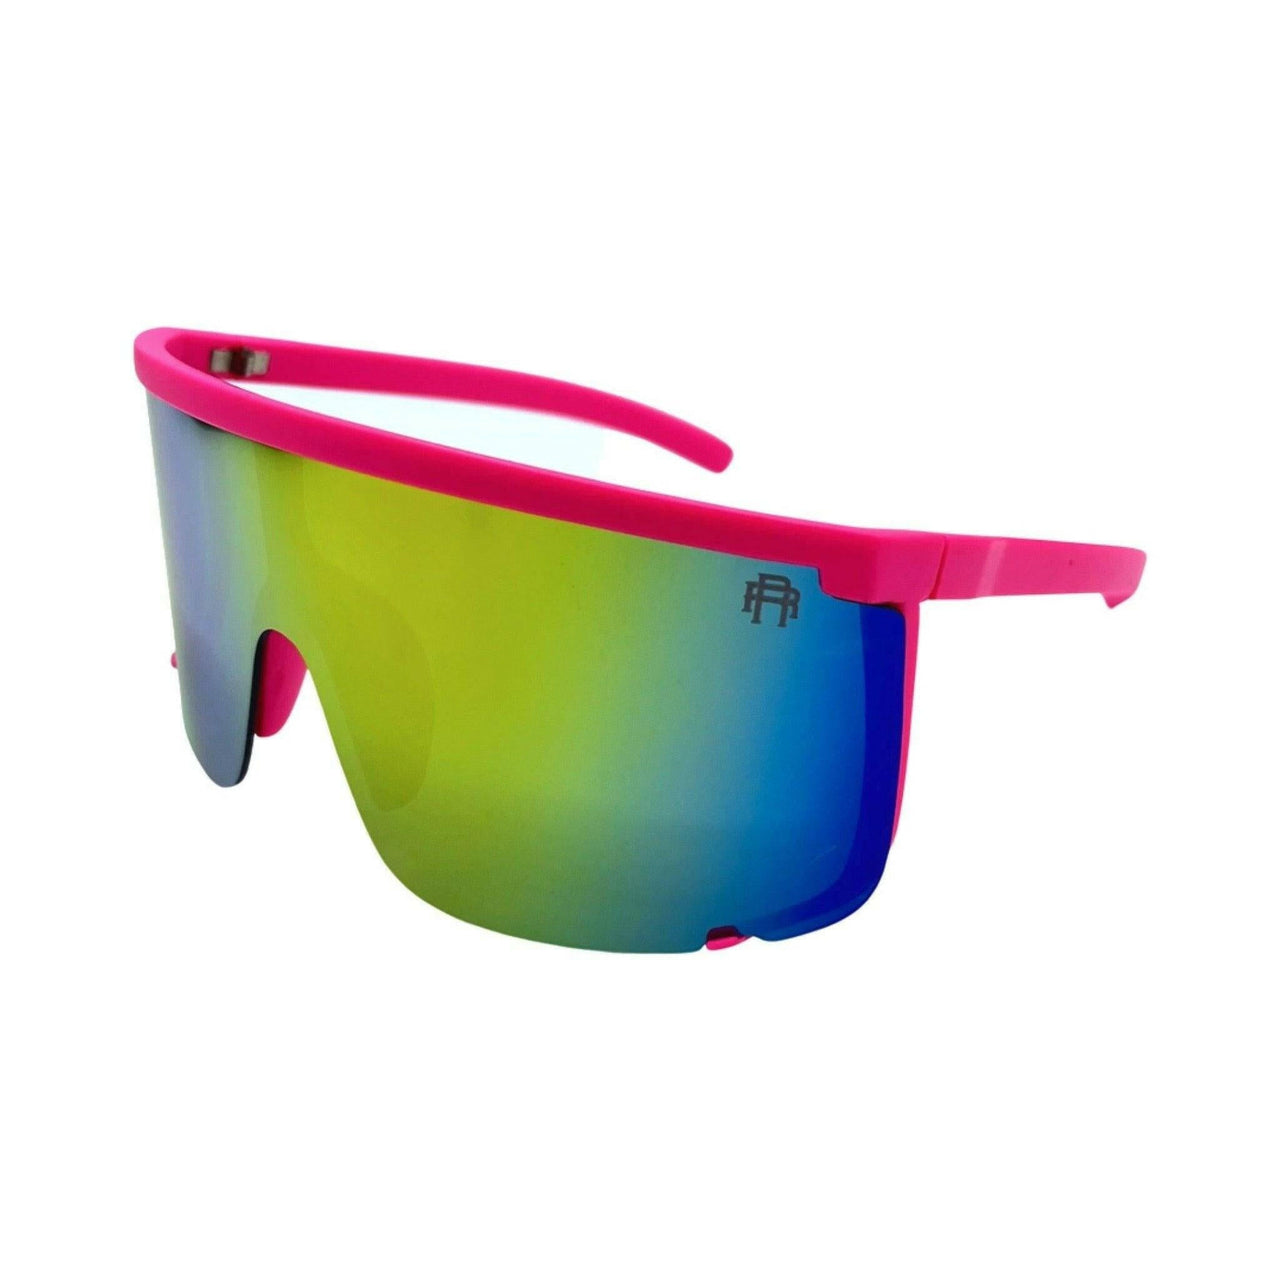 Steezy Mirrored Pink Sunglasses